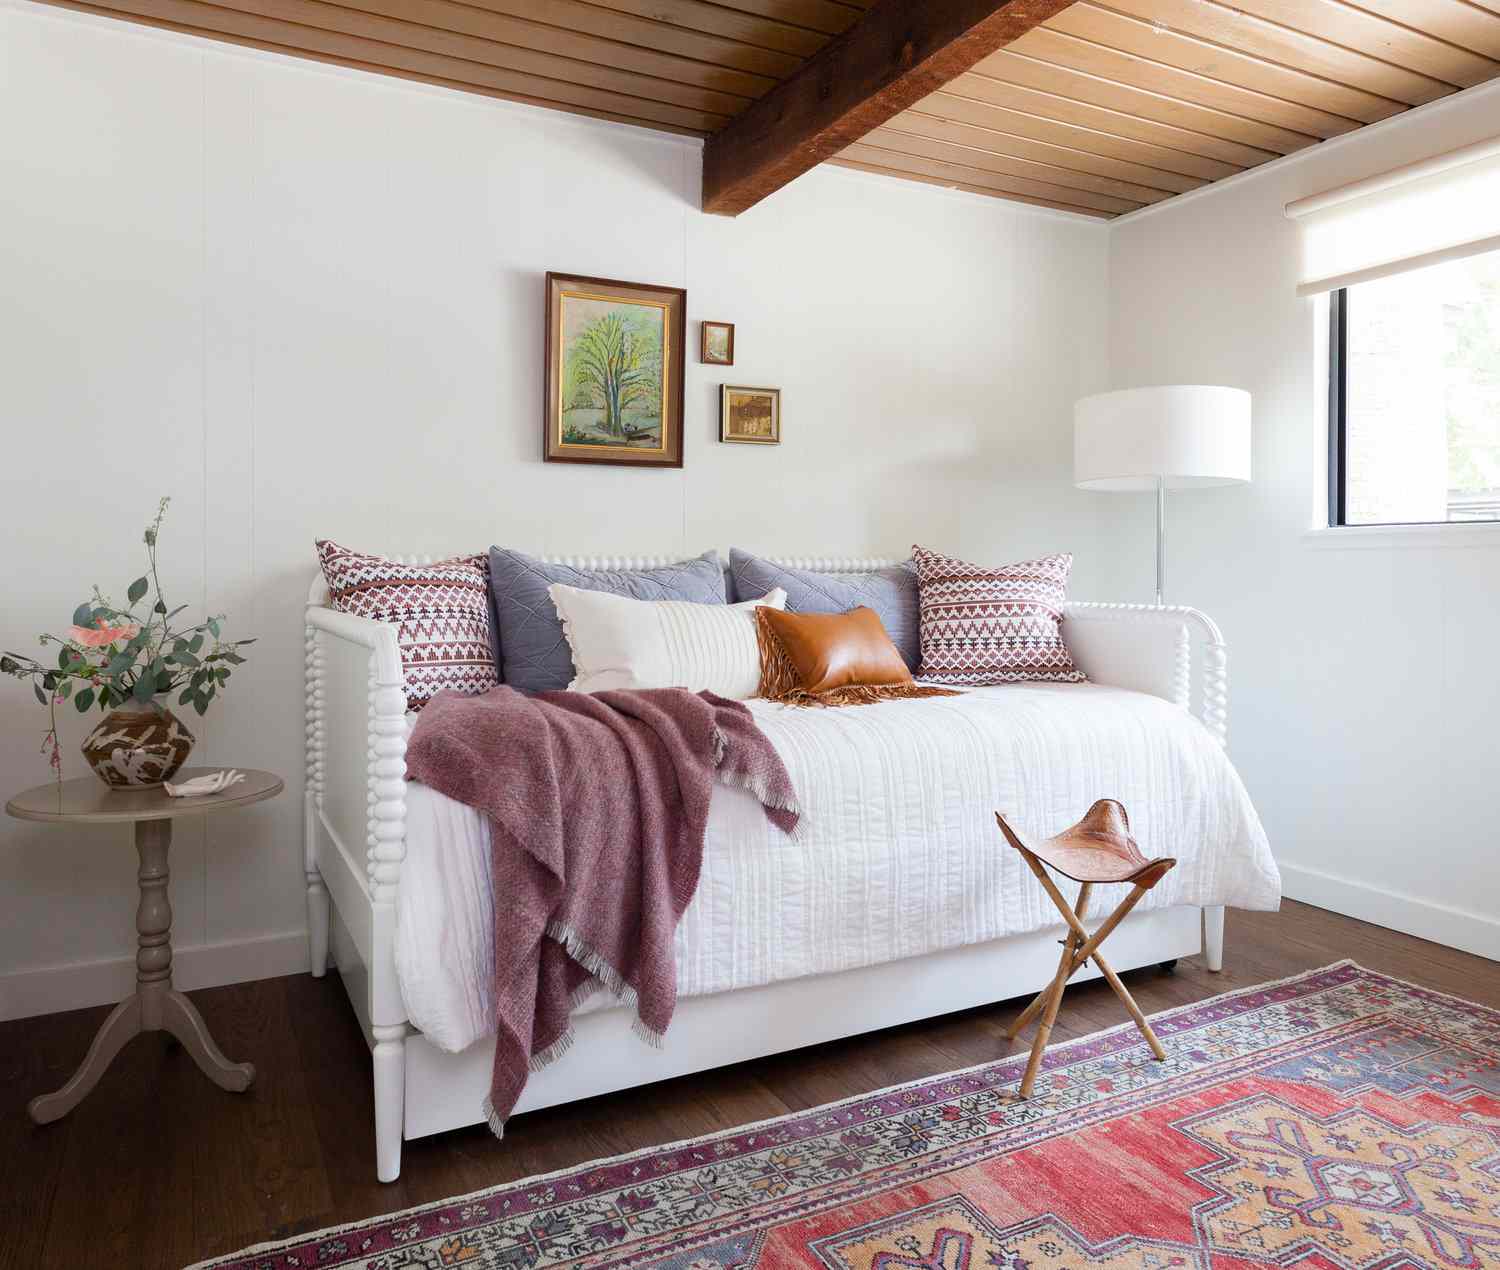 Daybed with shiplap ceiling